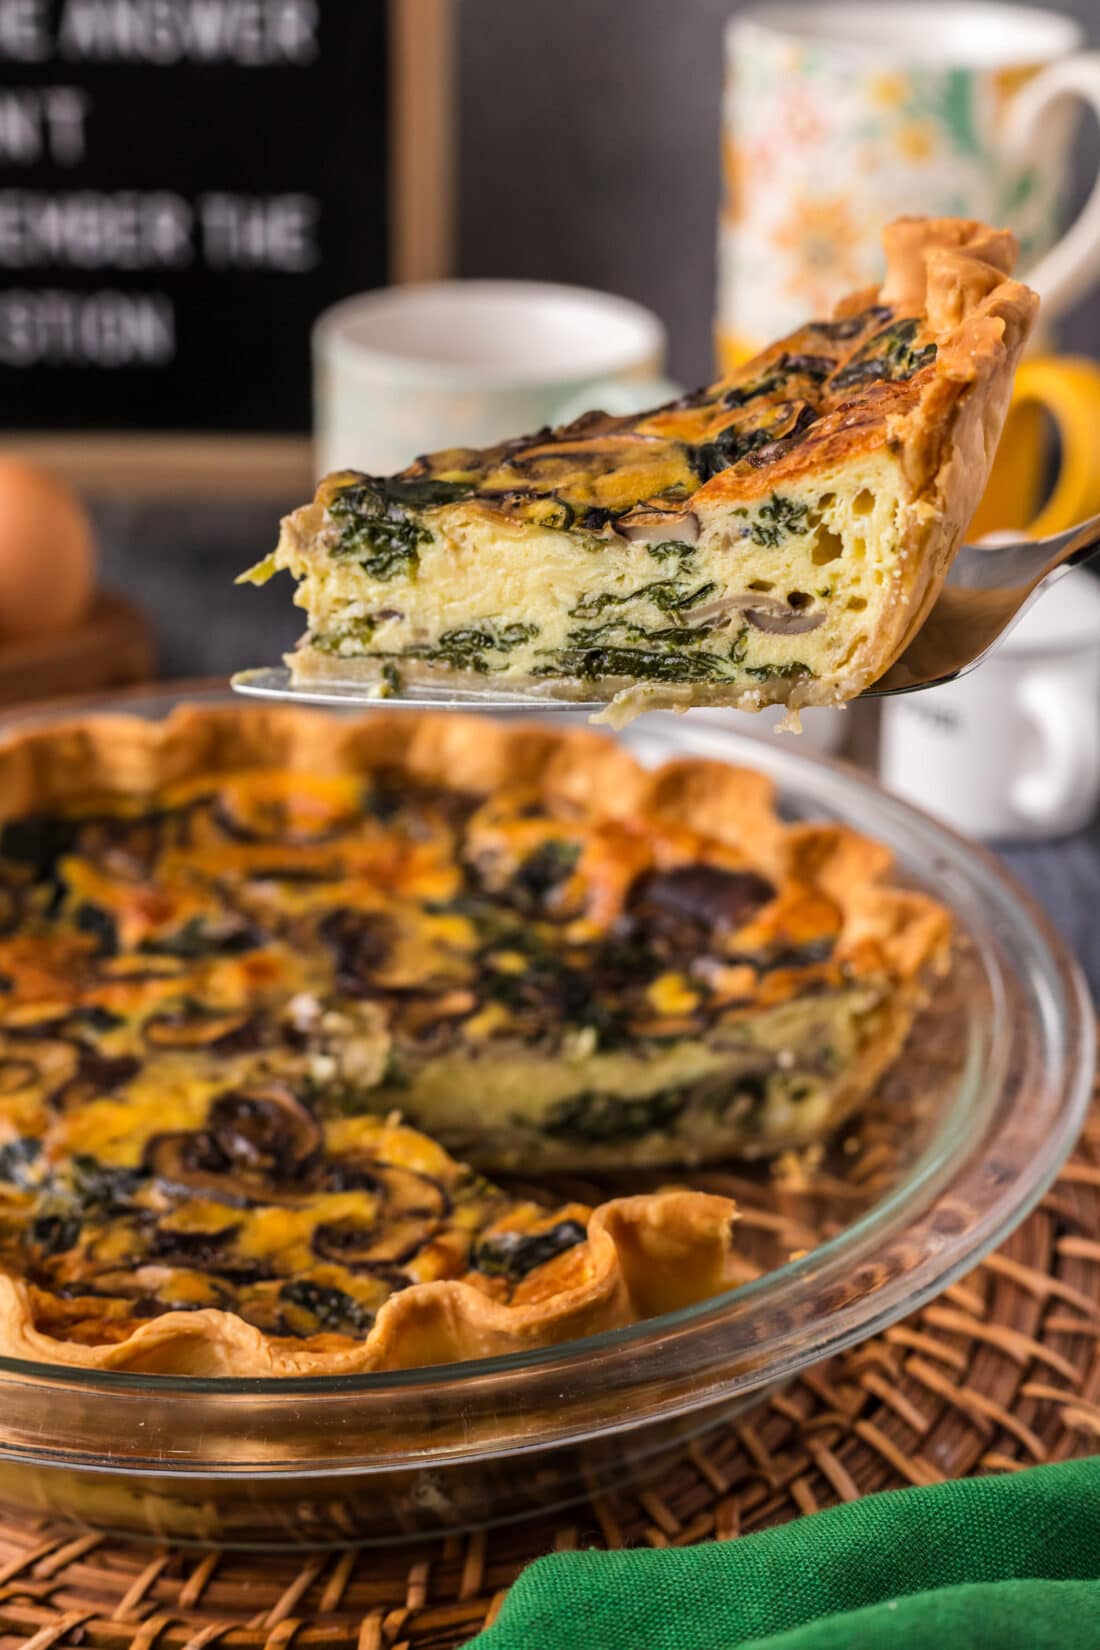 Slice of Spinach Mushroom Quiche being lifted out of the pie plate